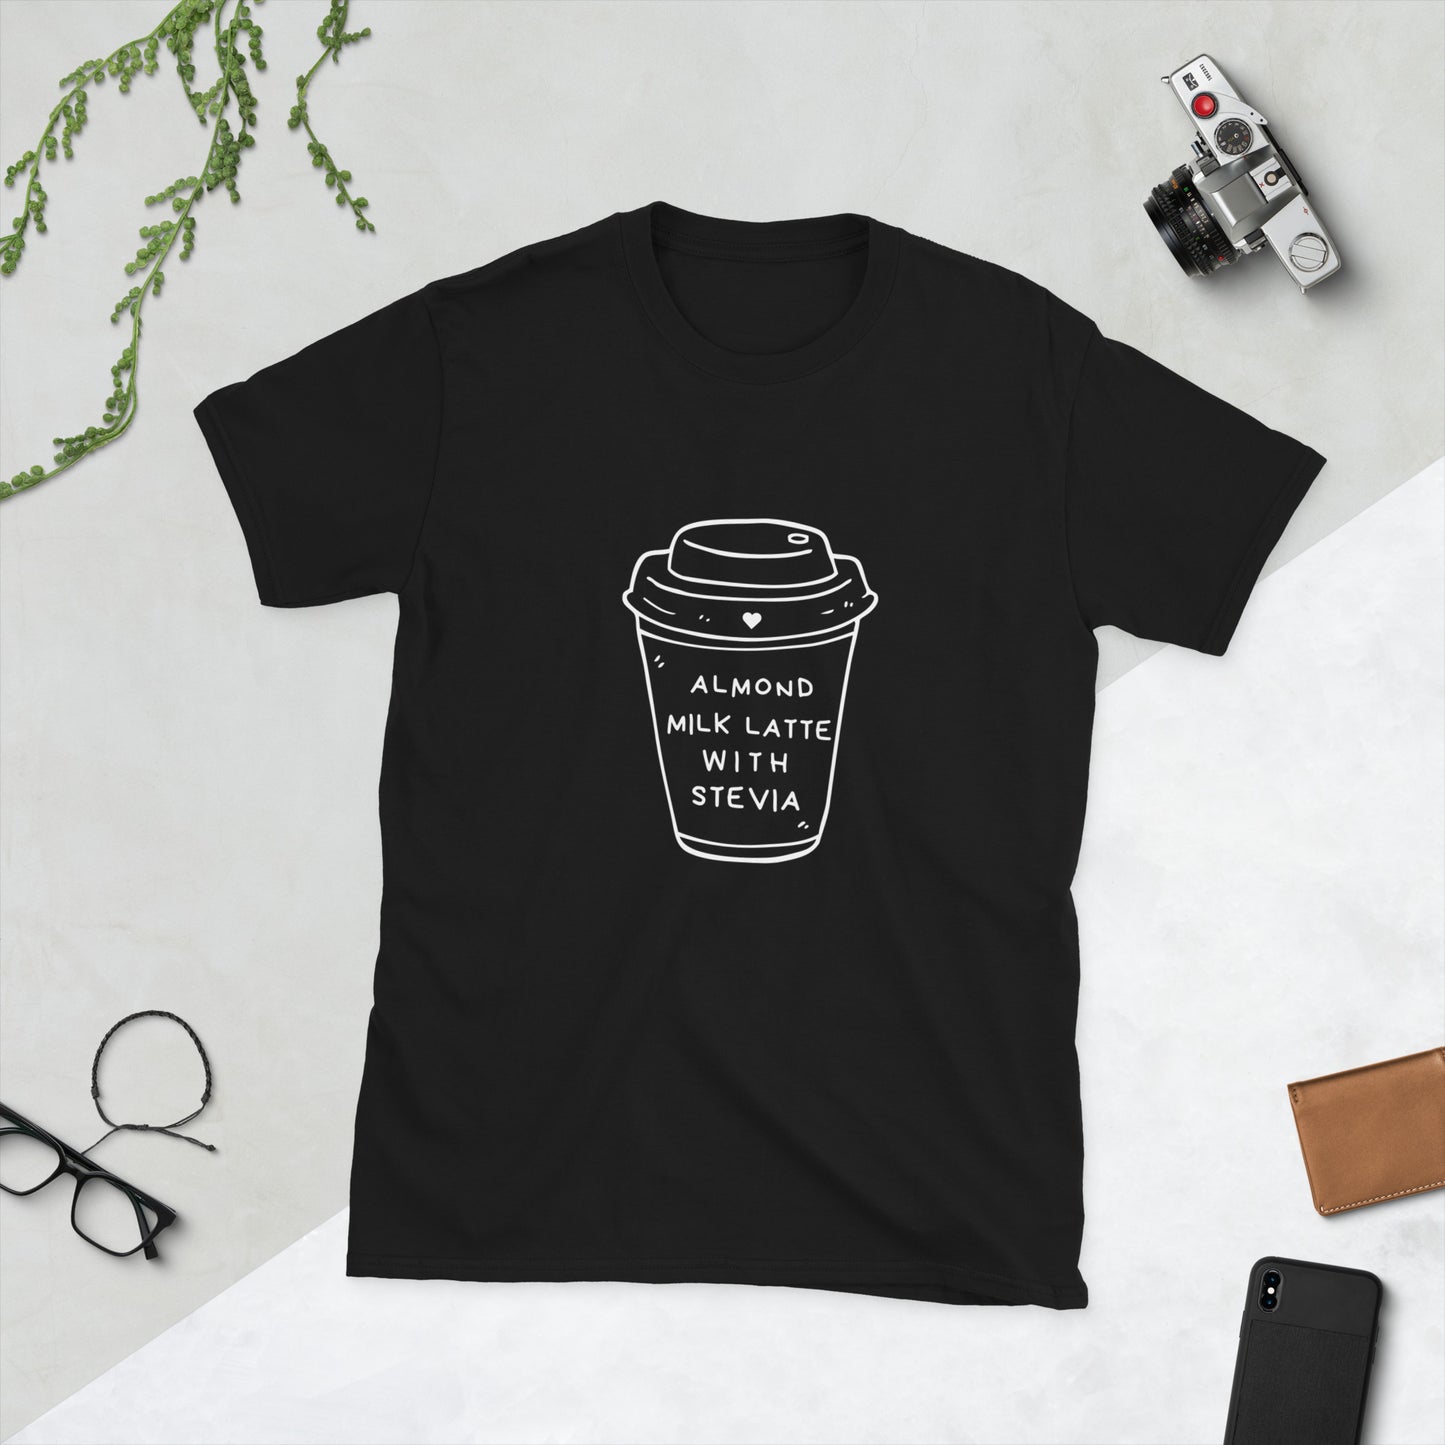 Almond Milk Latte with Stevia - Short-Sleeve Unisex T-Shirt ~ Sharon Dawn Collection (Sale Price: $44.20 CAD)